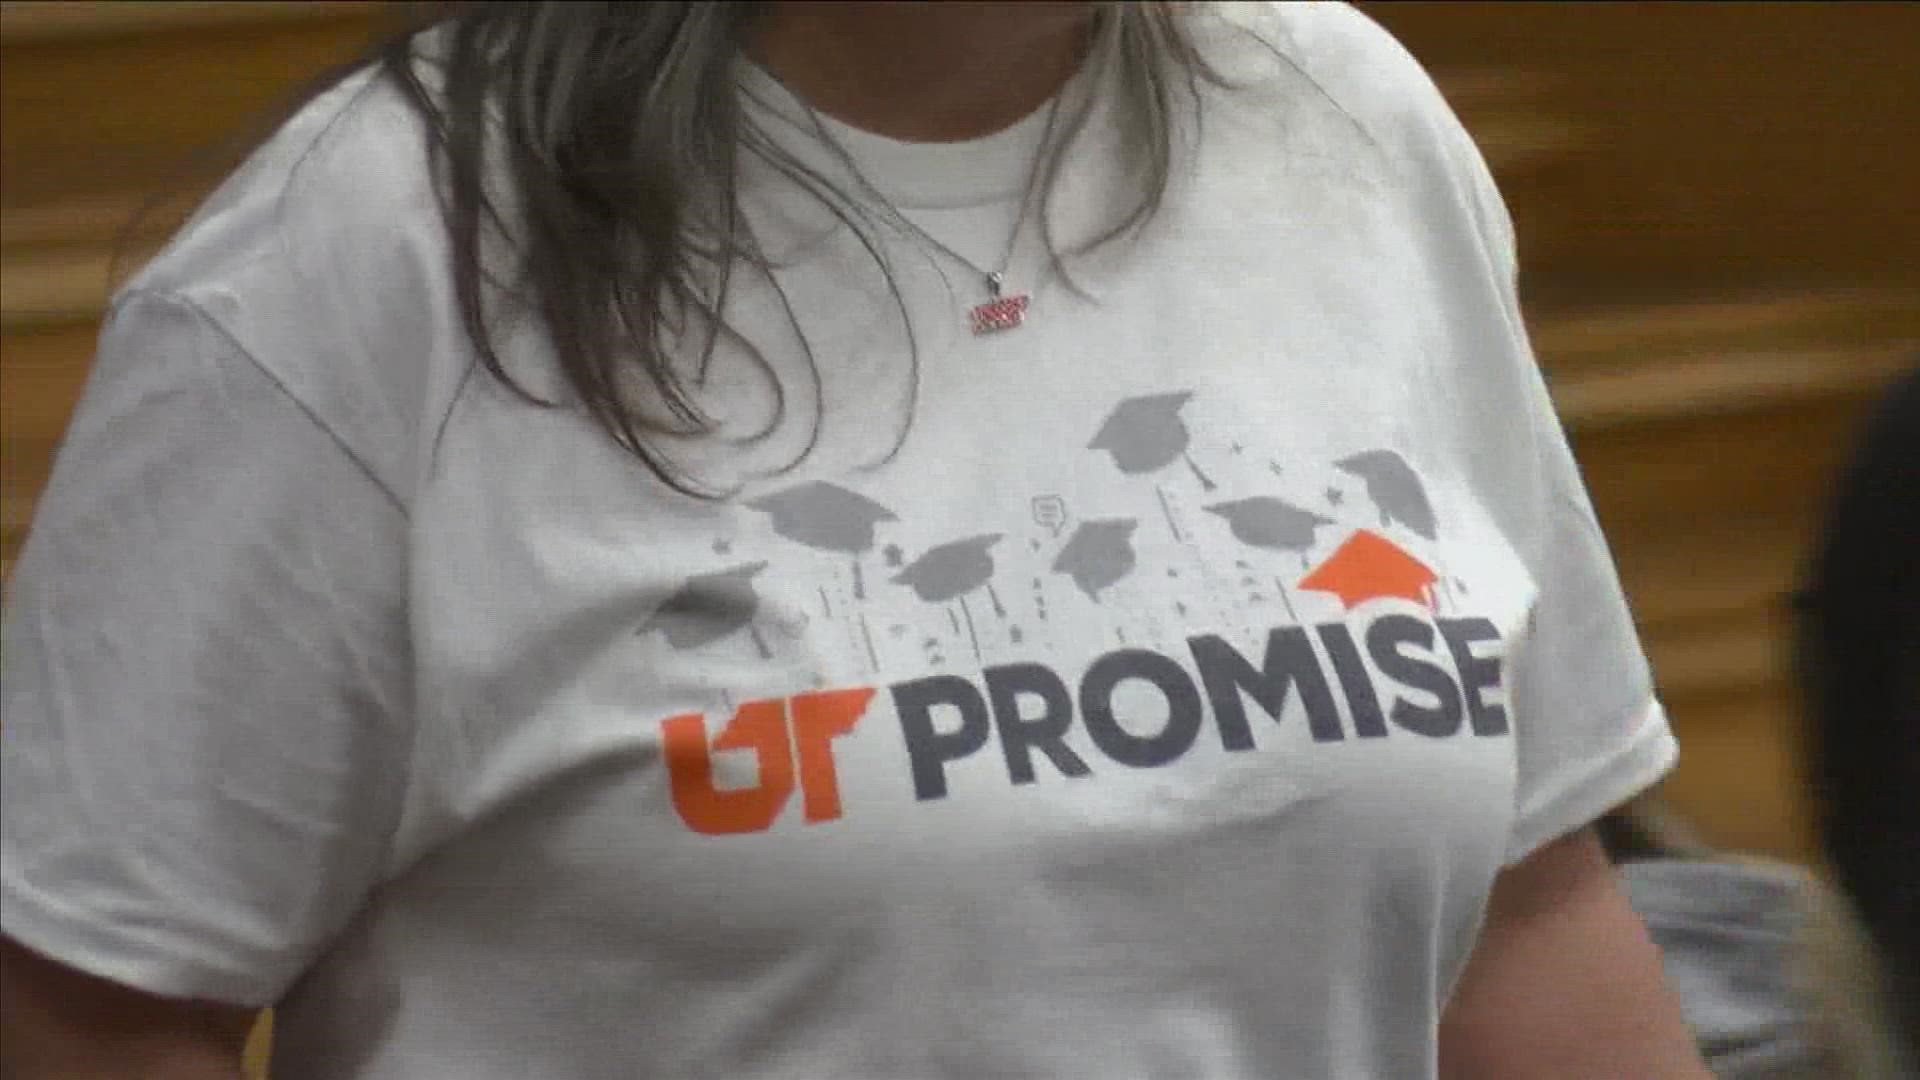 After increasing the maximum qualifying yearly household income from $50,000 to $60,000, more students have access to UT Promise scholarship funds.